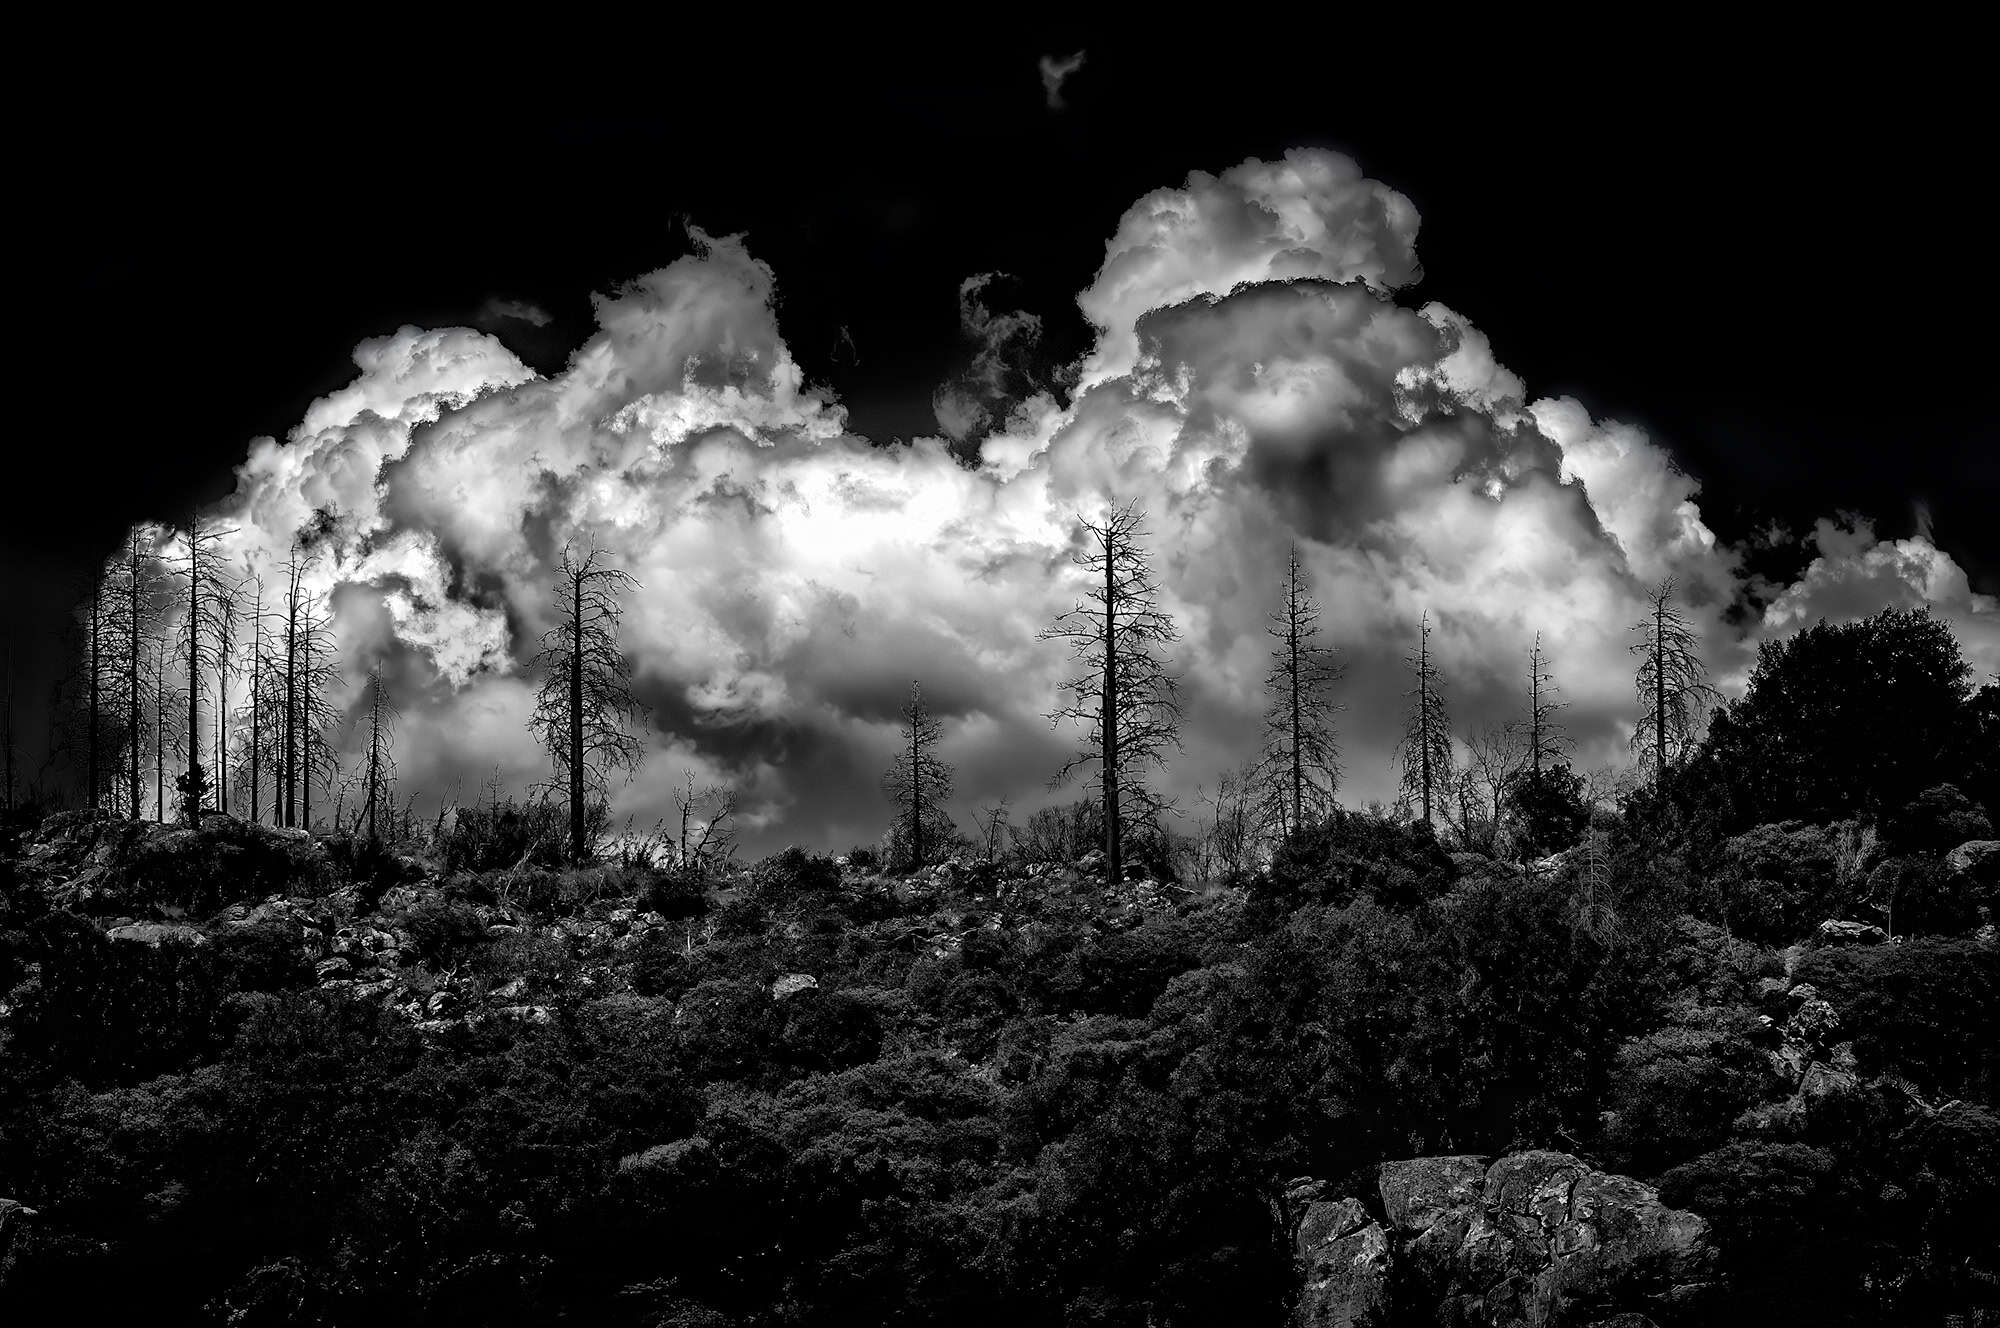 Burnt trees in front of a low riding storm cloud